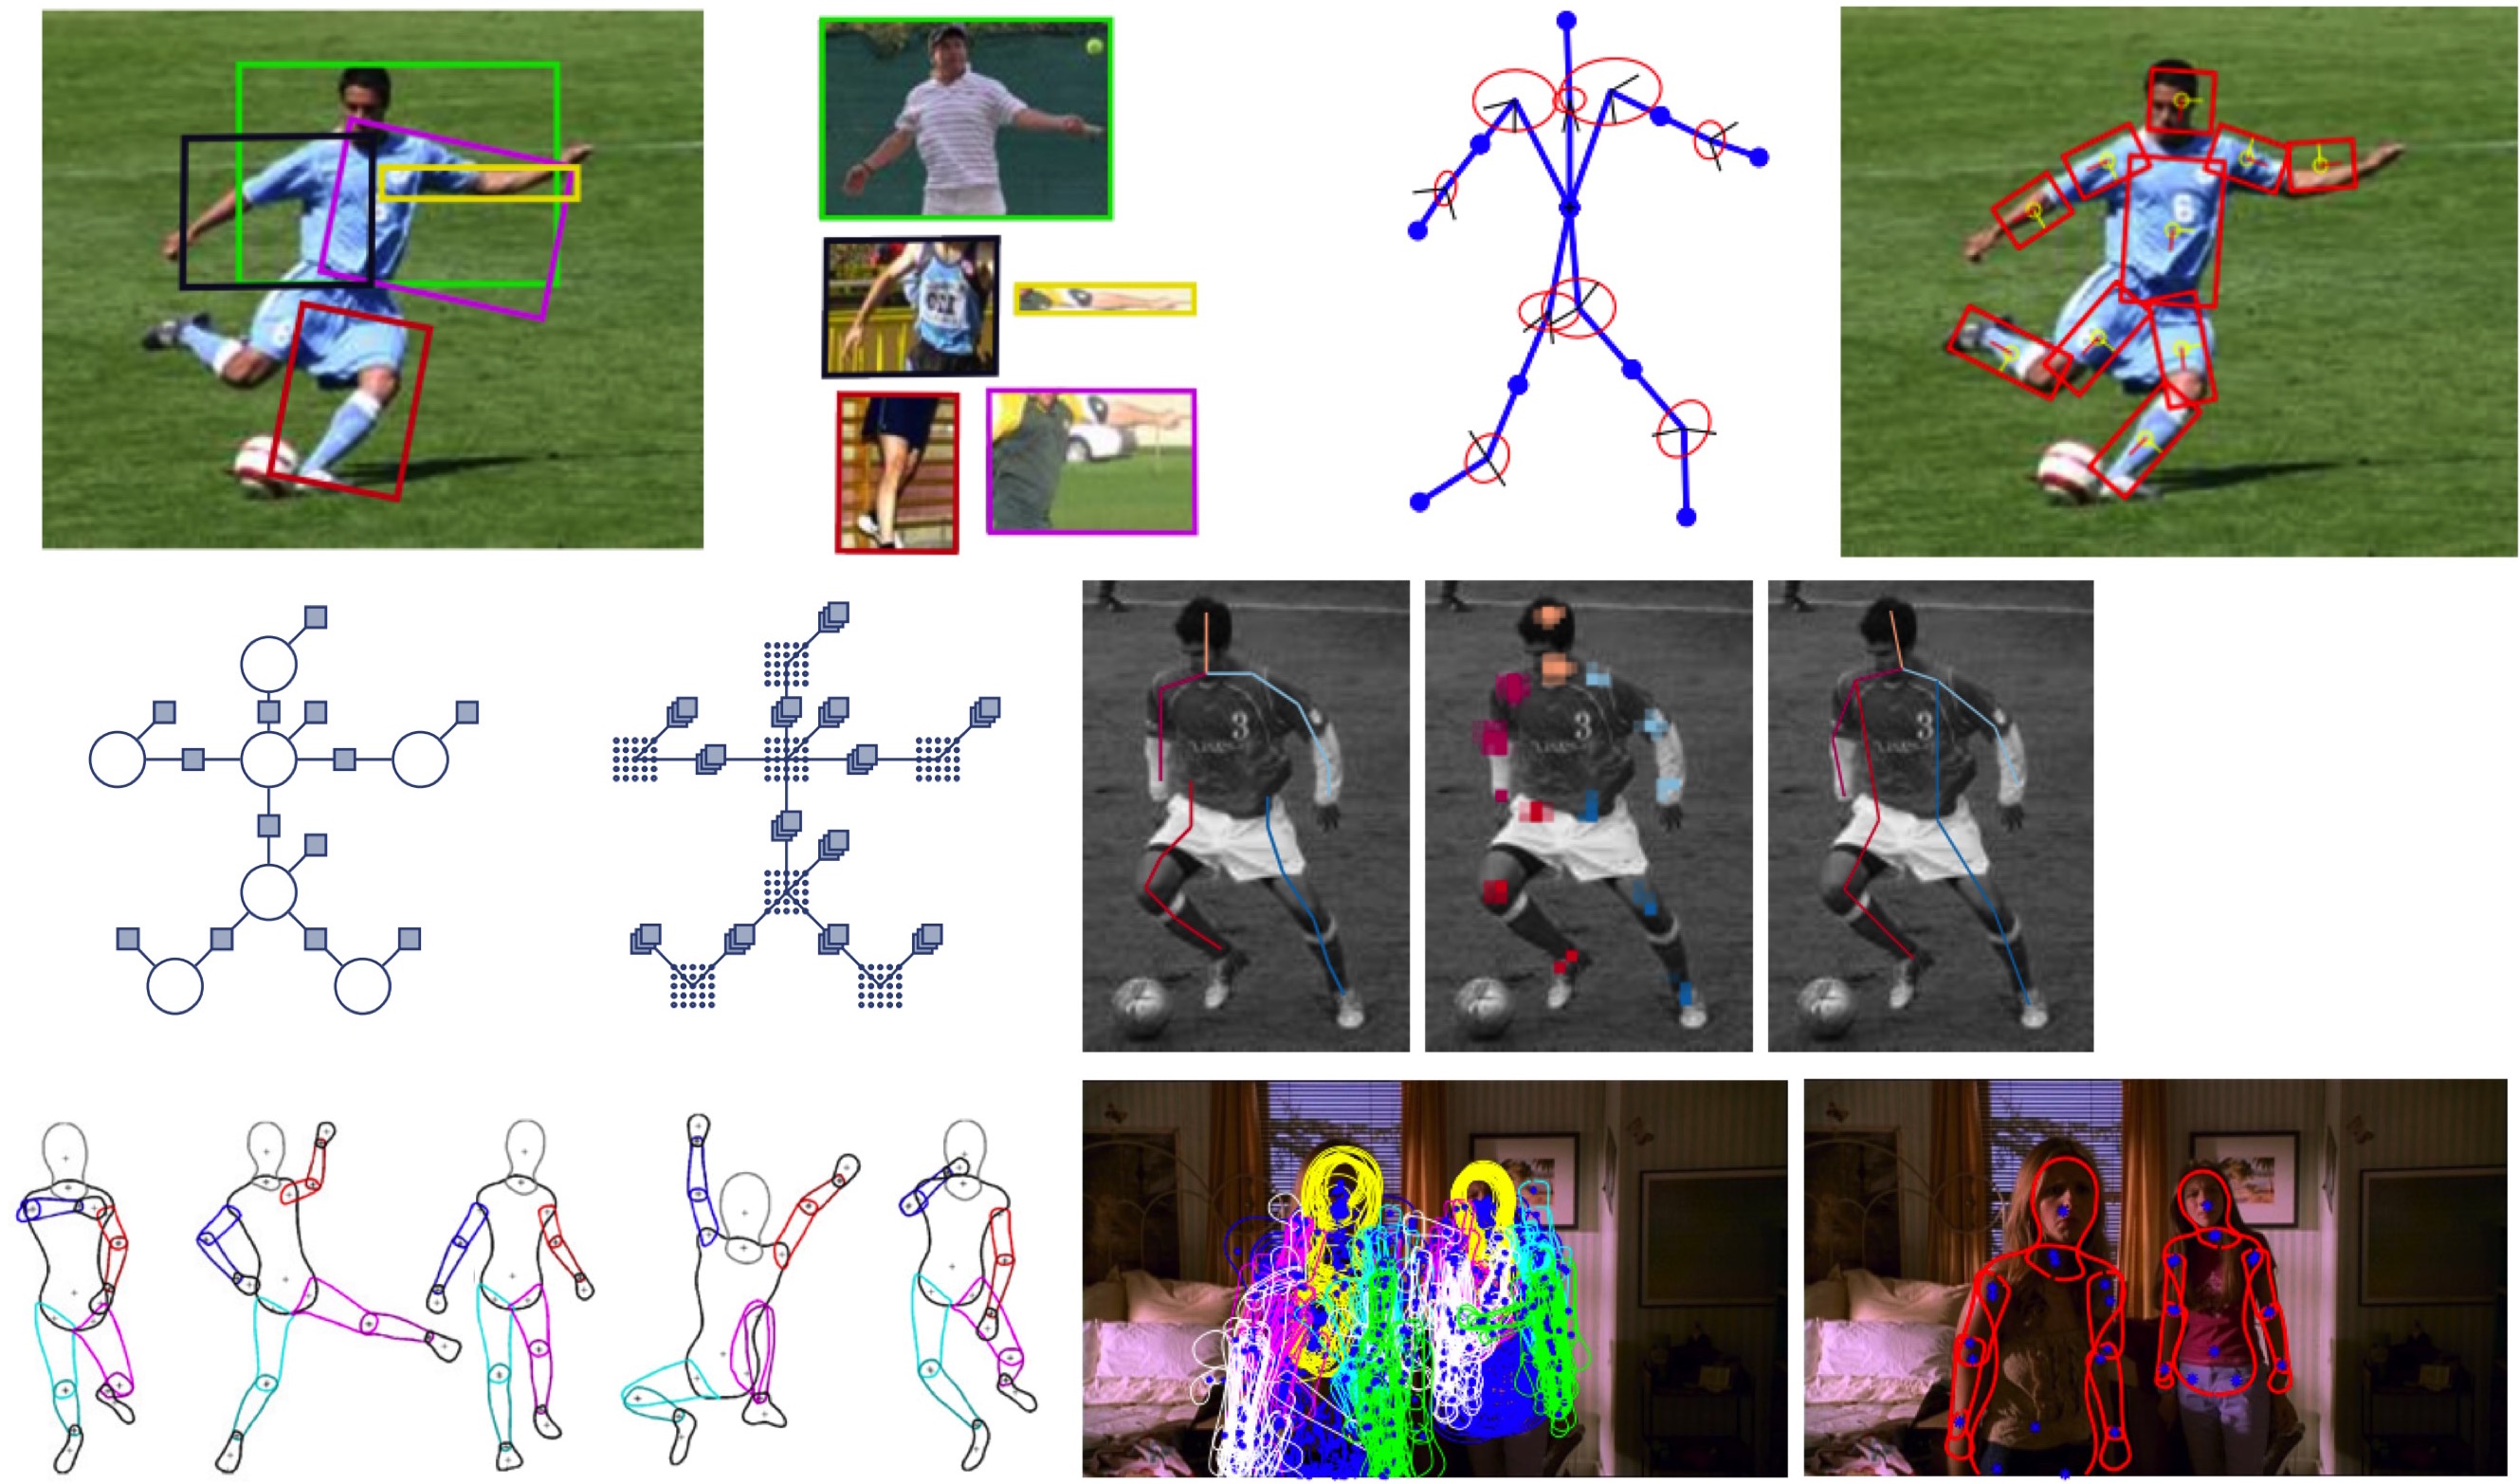 Unsupervised Adversarial Learning of 3D Human Pose from 2D Joint Locations  - Dwango Media Village(ドワンゴメディアヴィレッジ,dmv)